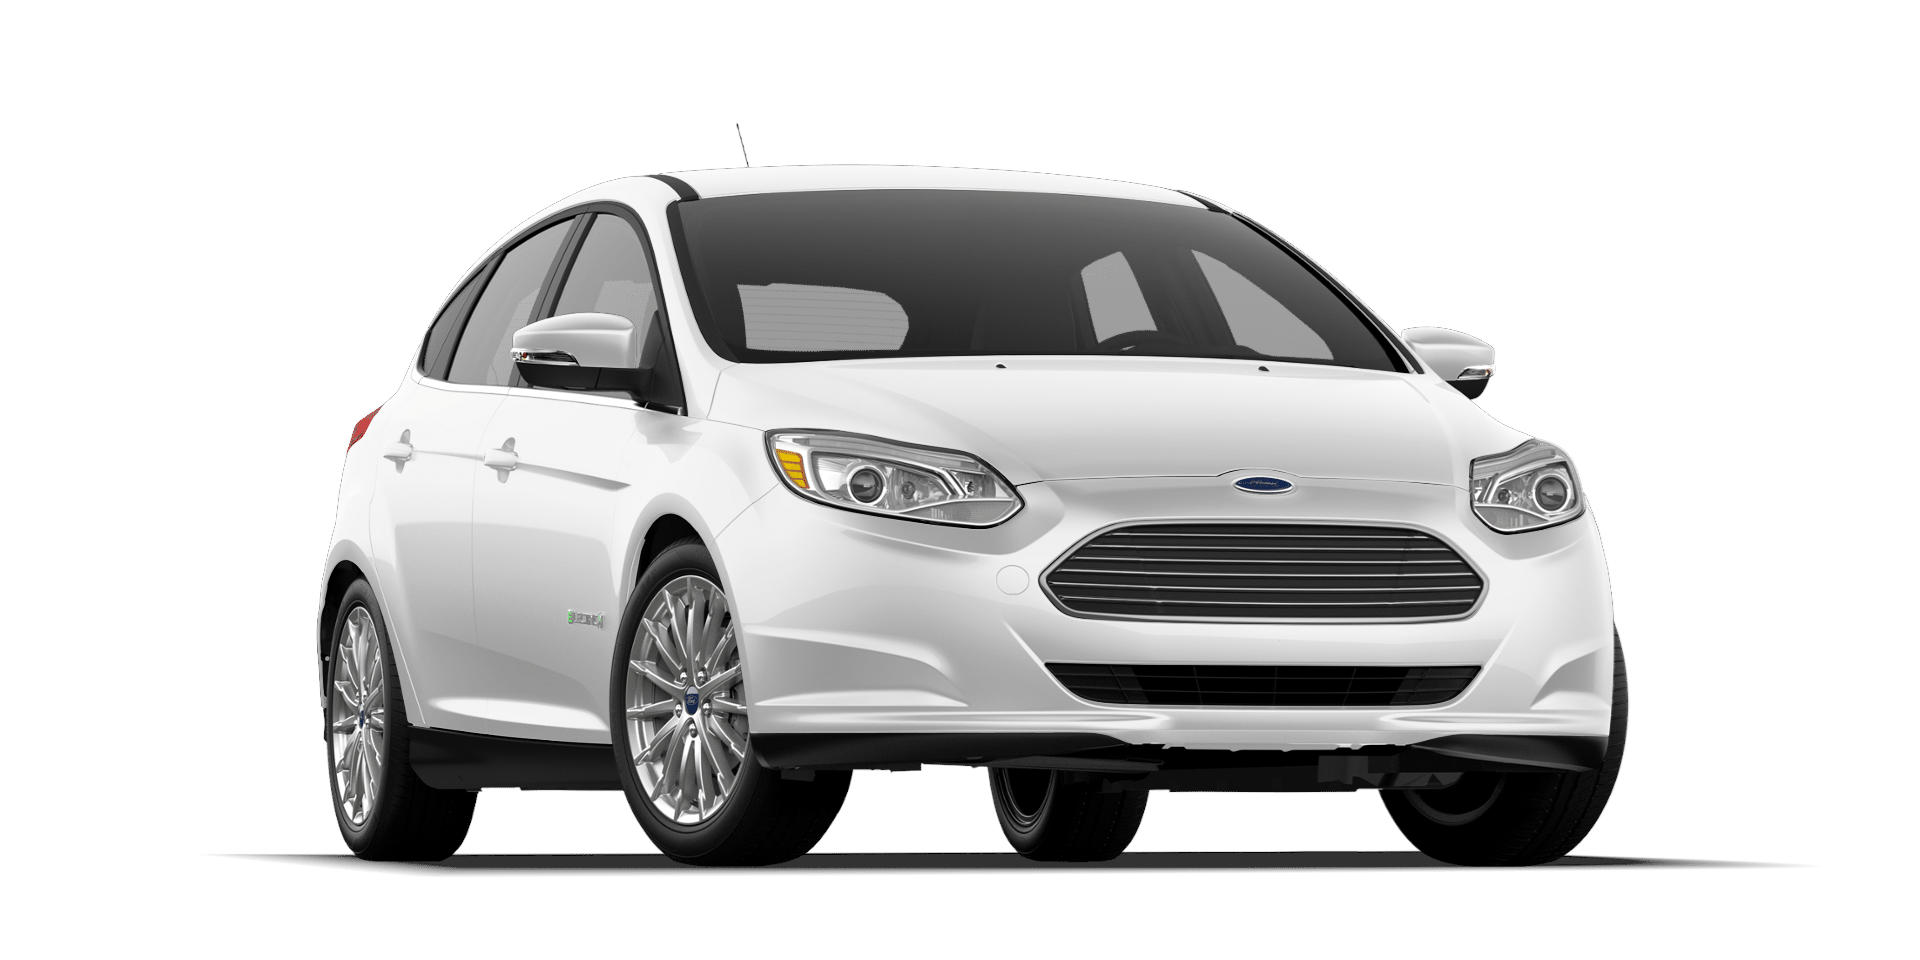 2013 Ford Focus Electric Hatchback Full Specs, Features and Price | CarBuzz